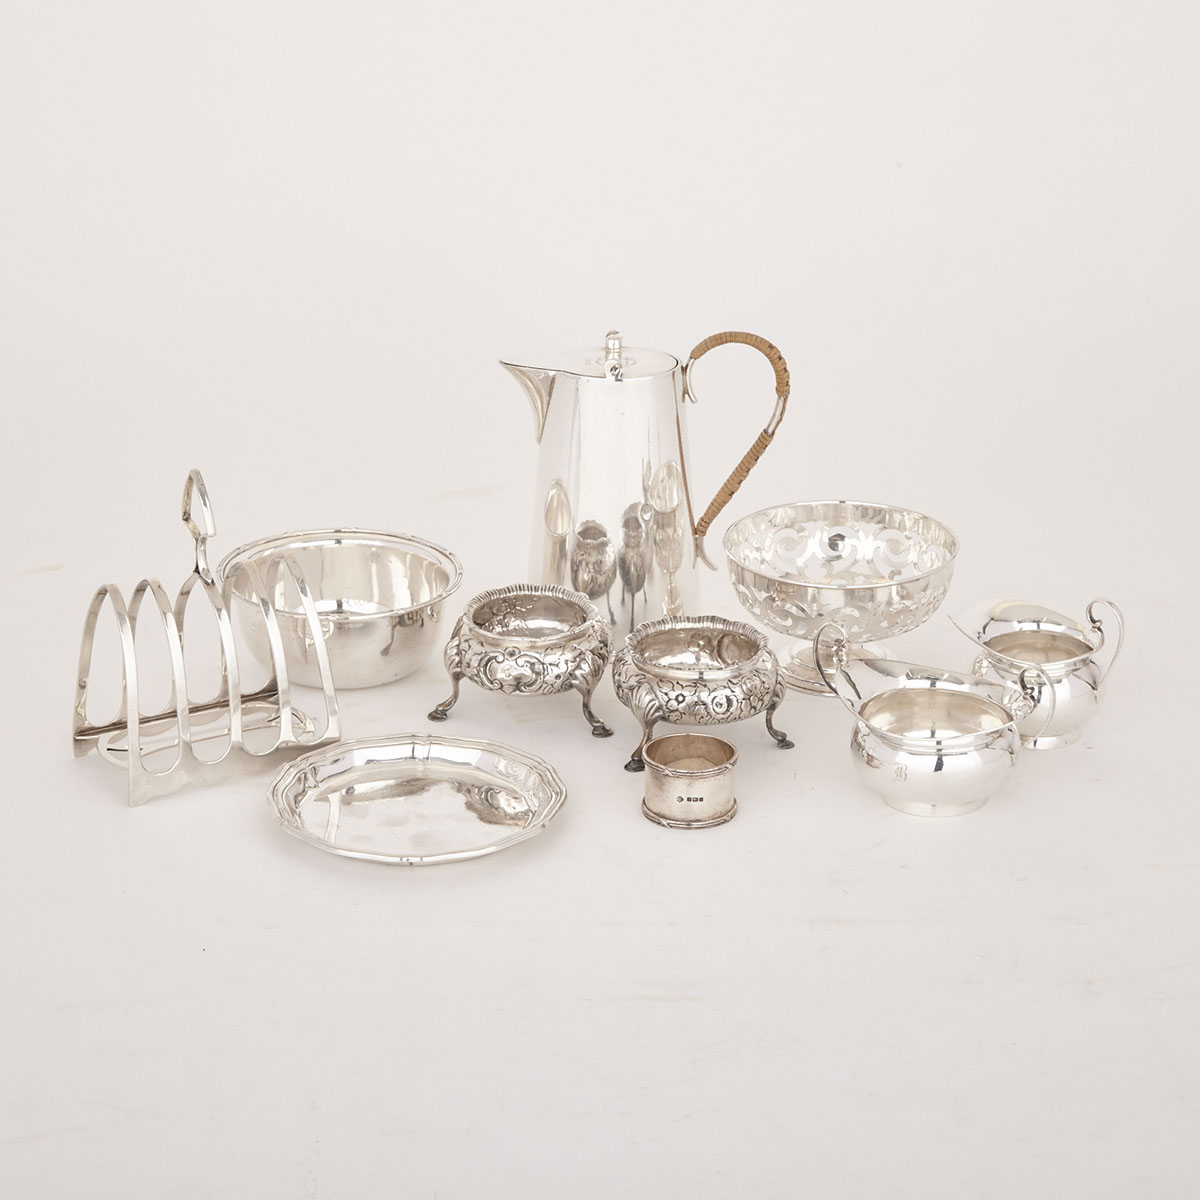 Grouped Lot of Victorian and Later English Silver, 19th/20th century